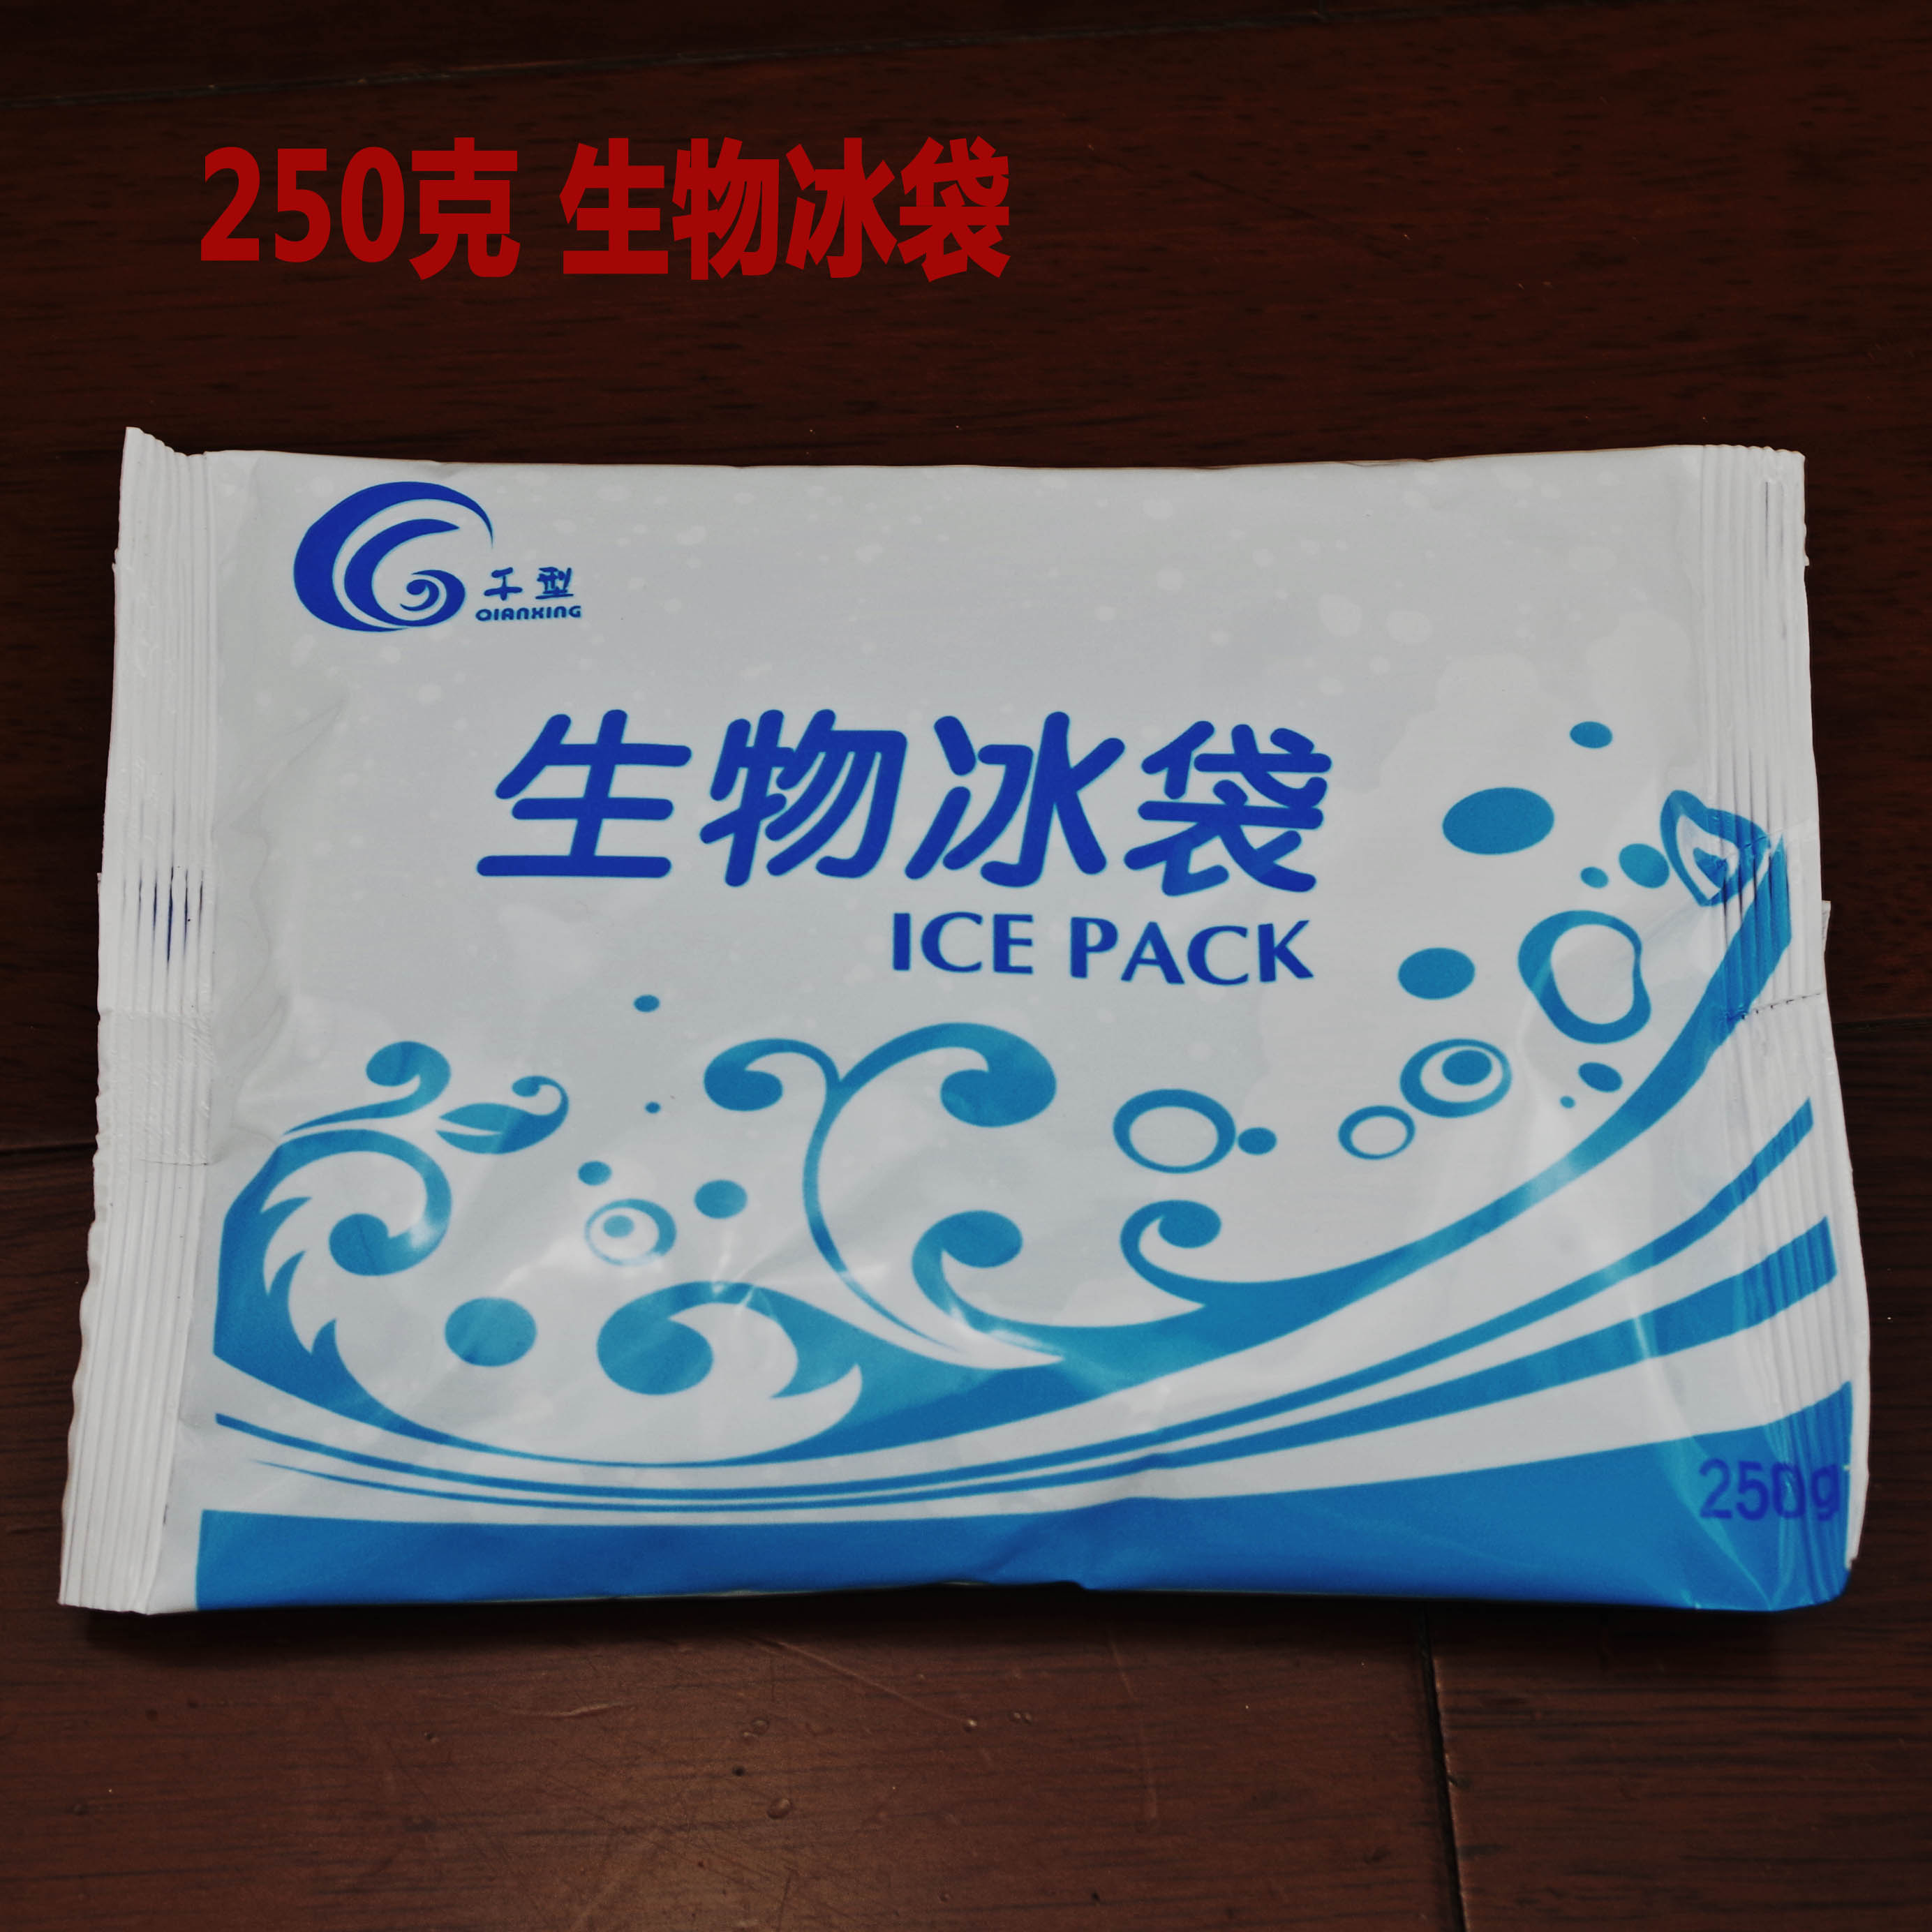 Fresh-keeping package refrigerated transport ice-packed chocolate royal jelly refrigerated transport 250g bio-thermostatic ice bag